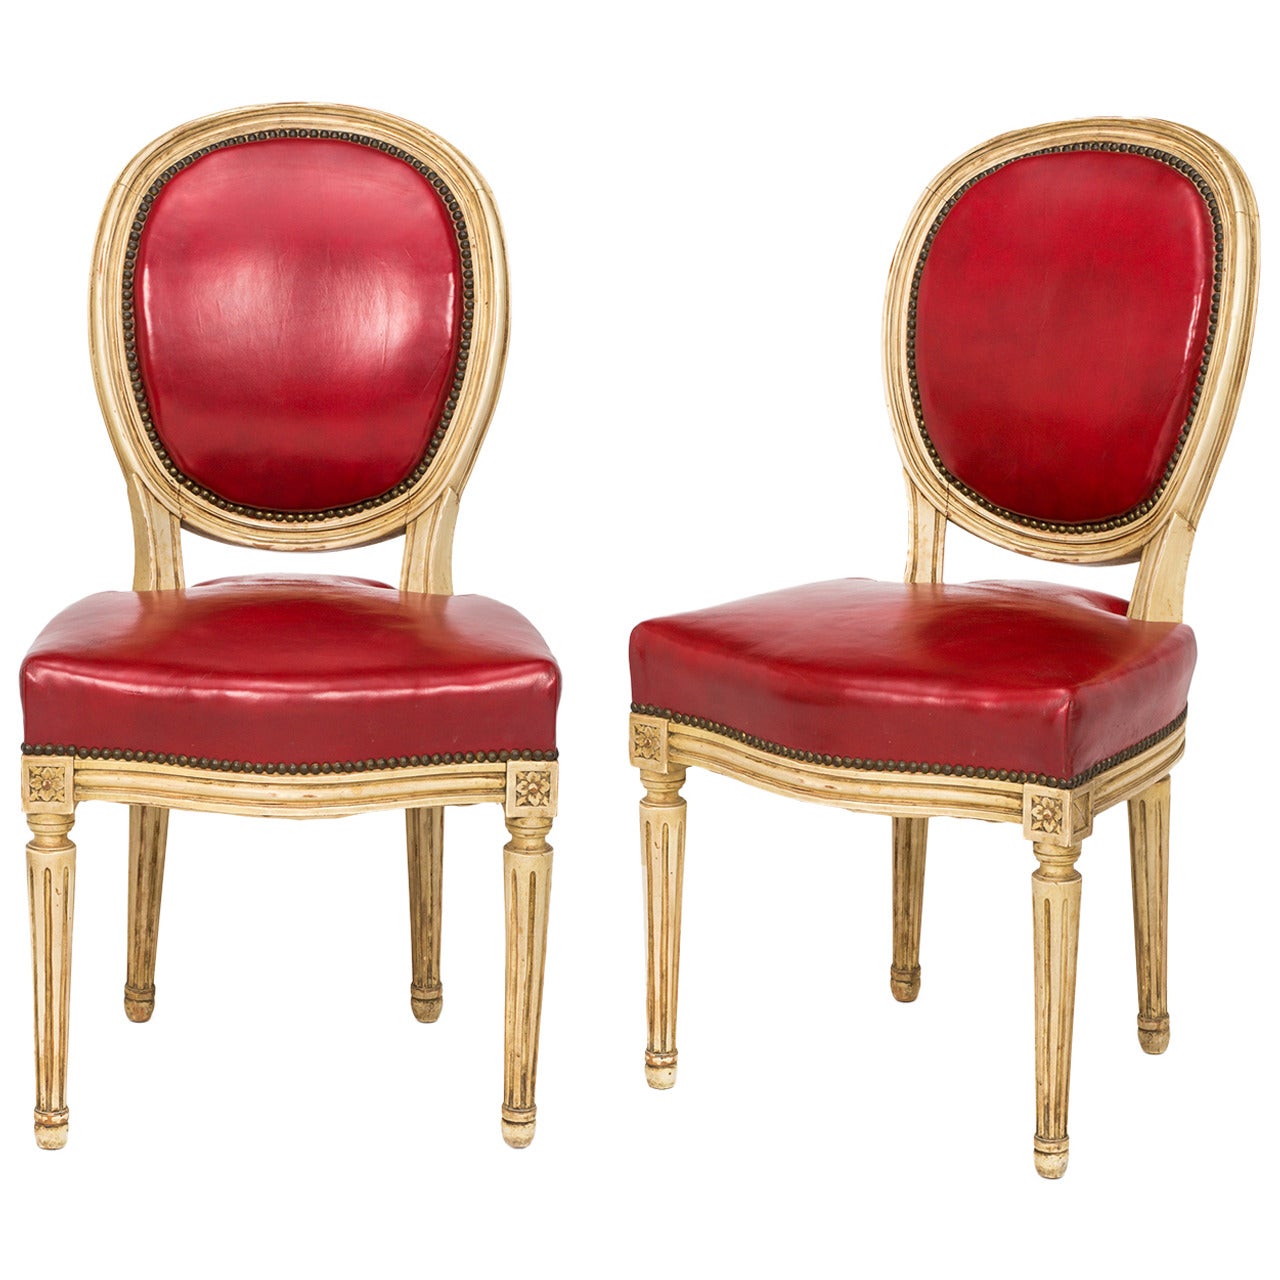 Pair of French Louis XVI Style Red Leather Chairs, 19th Century For Sale